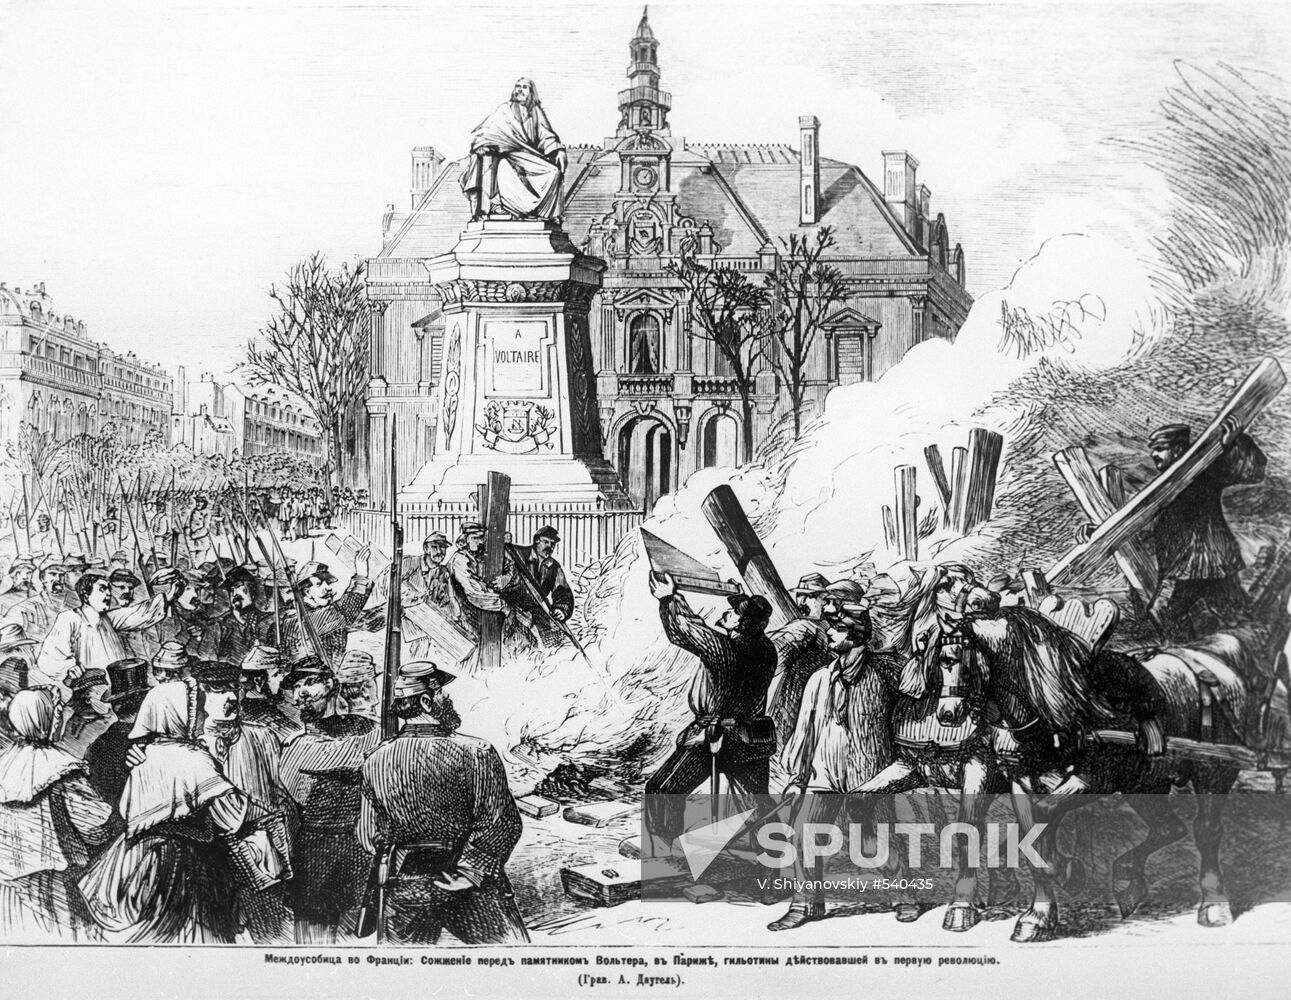 Engraving from "The Paris Commune" series